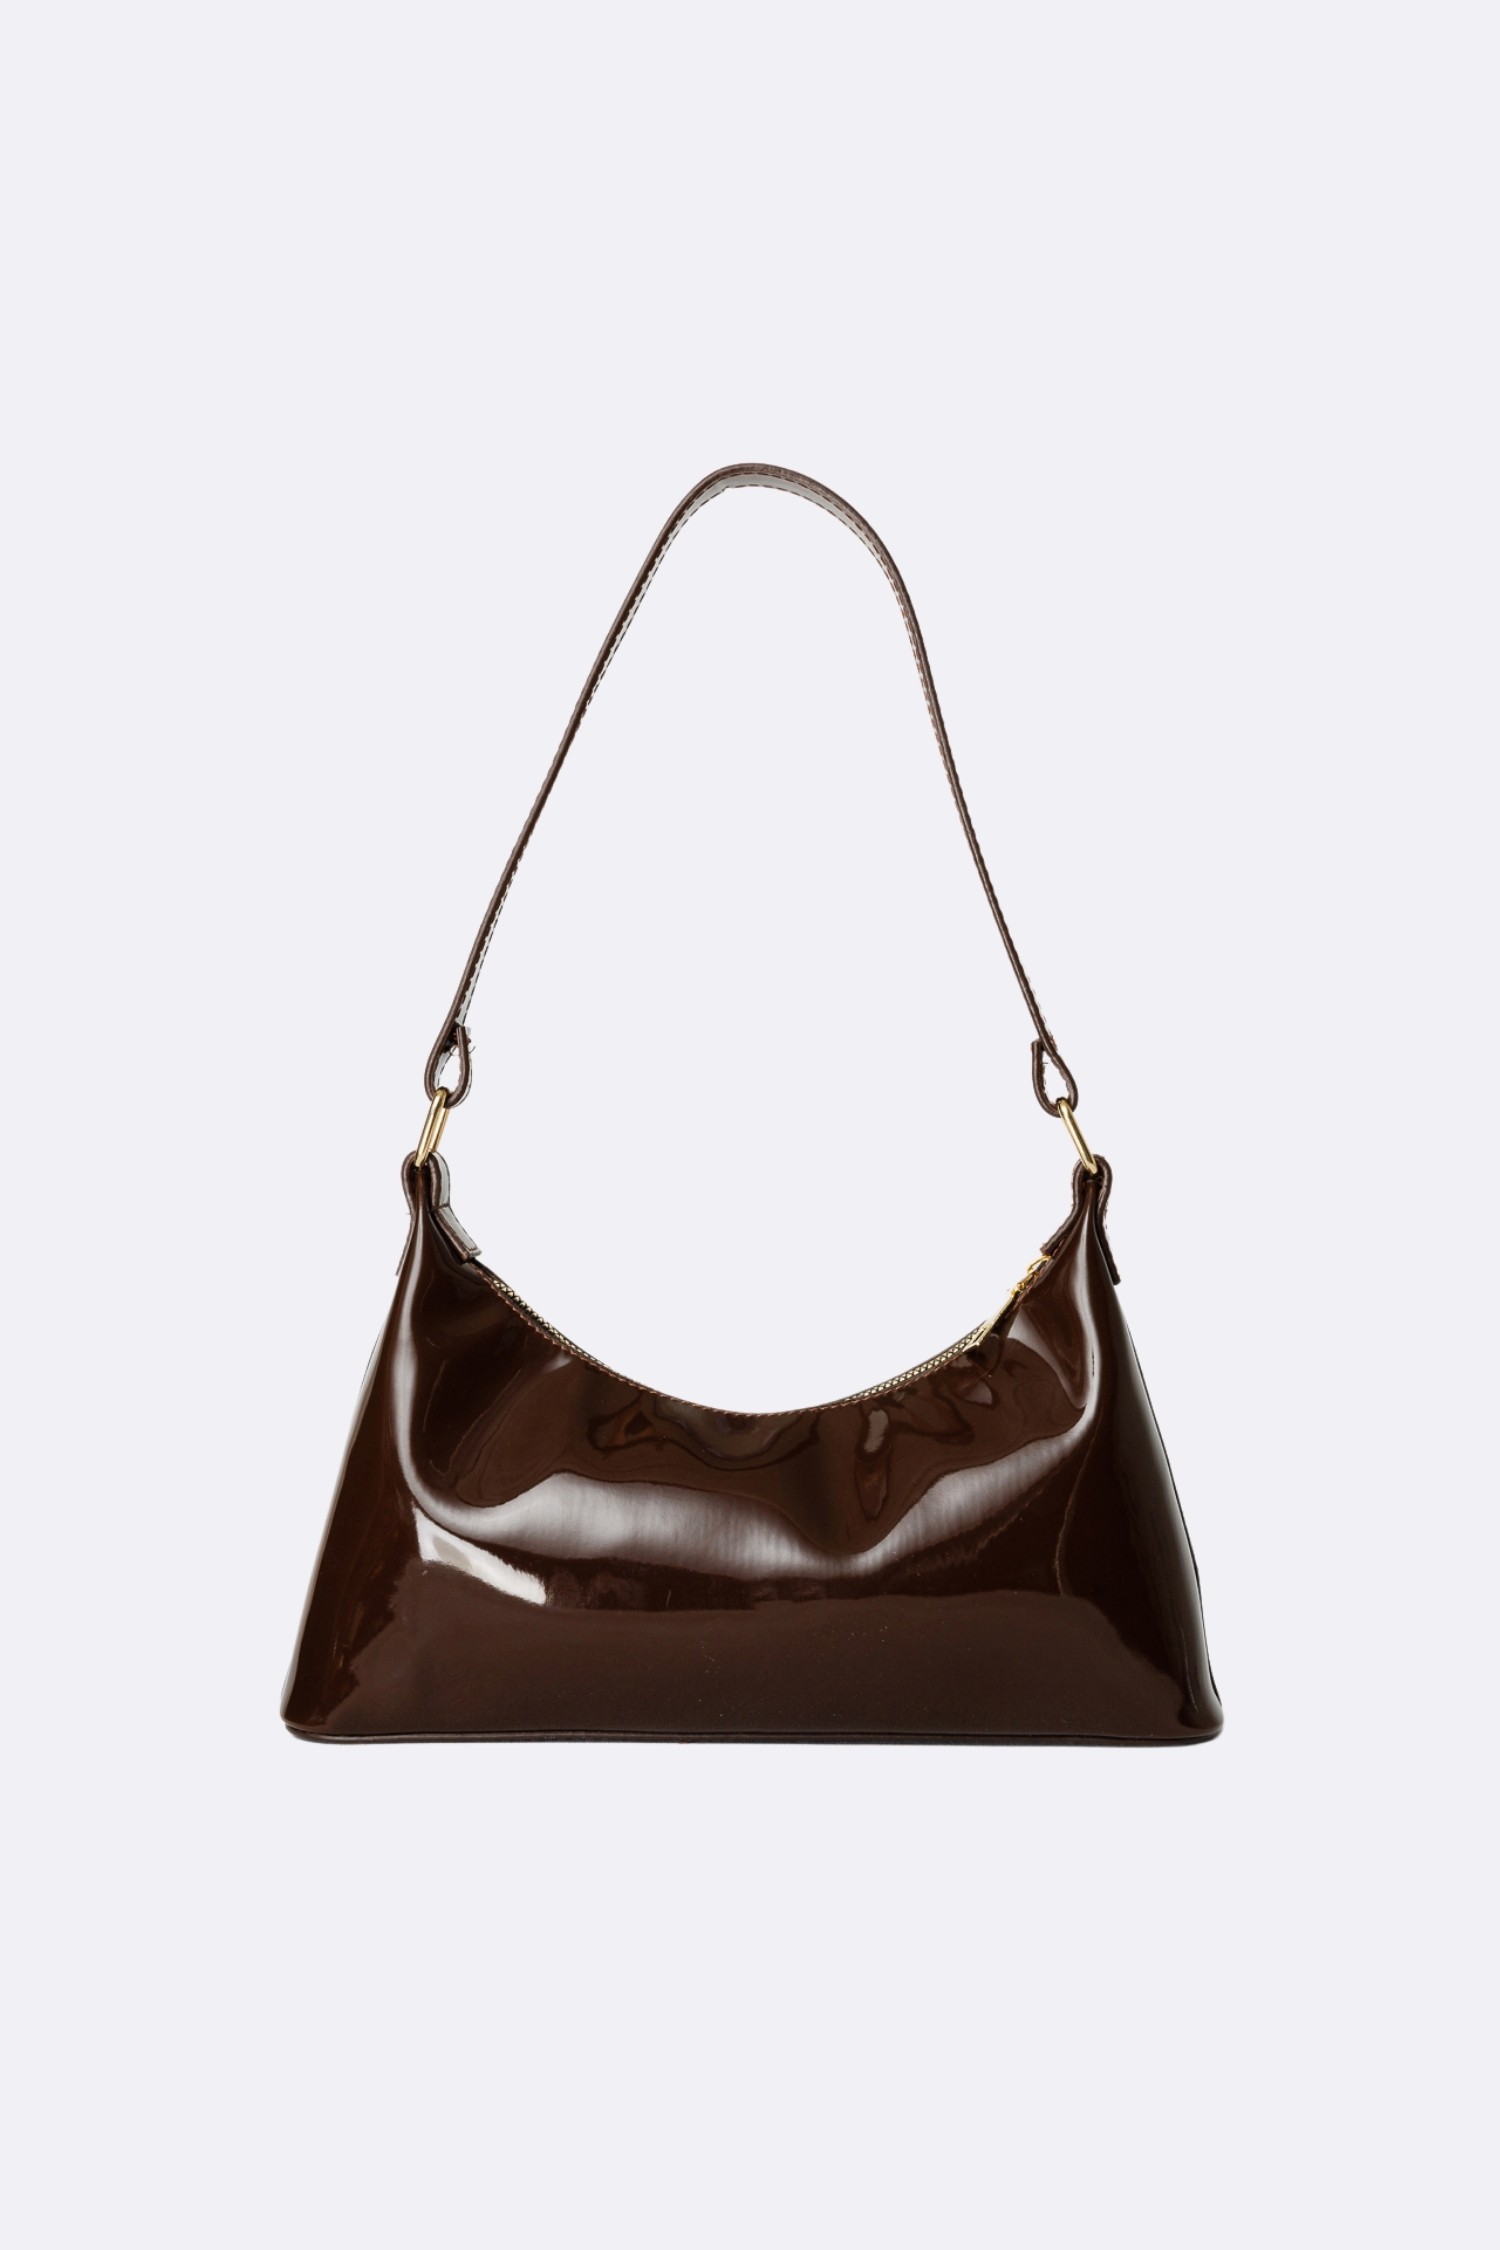 Garden Patent Leather Bag - Bitter Coffee